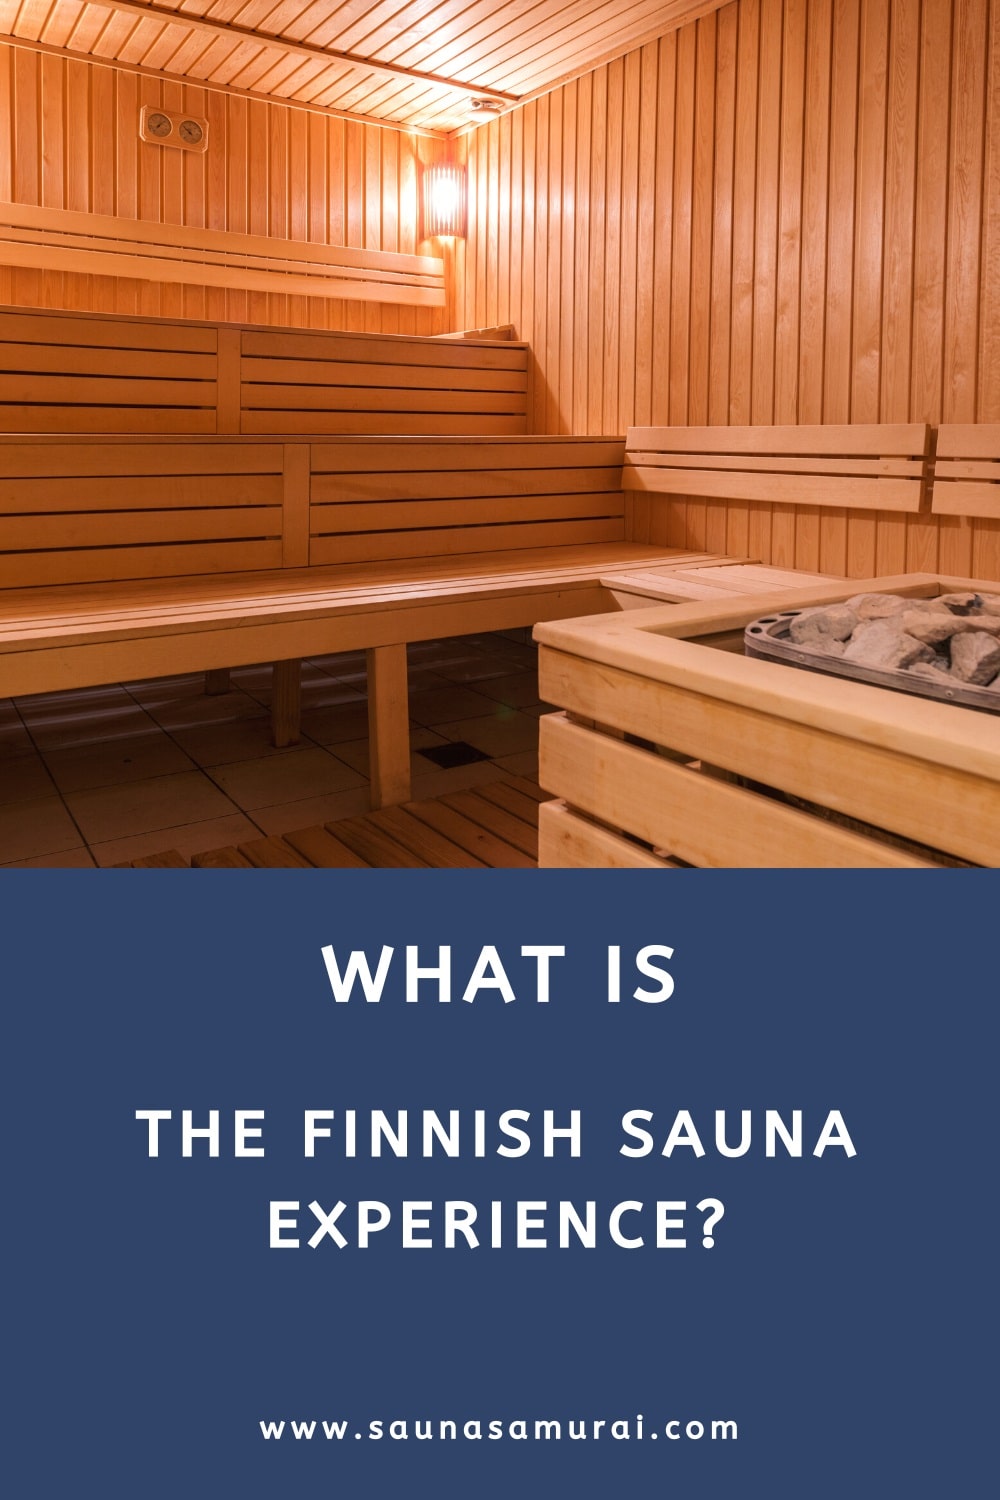 What is the Finnish sauna experience?